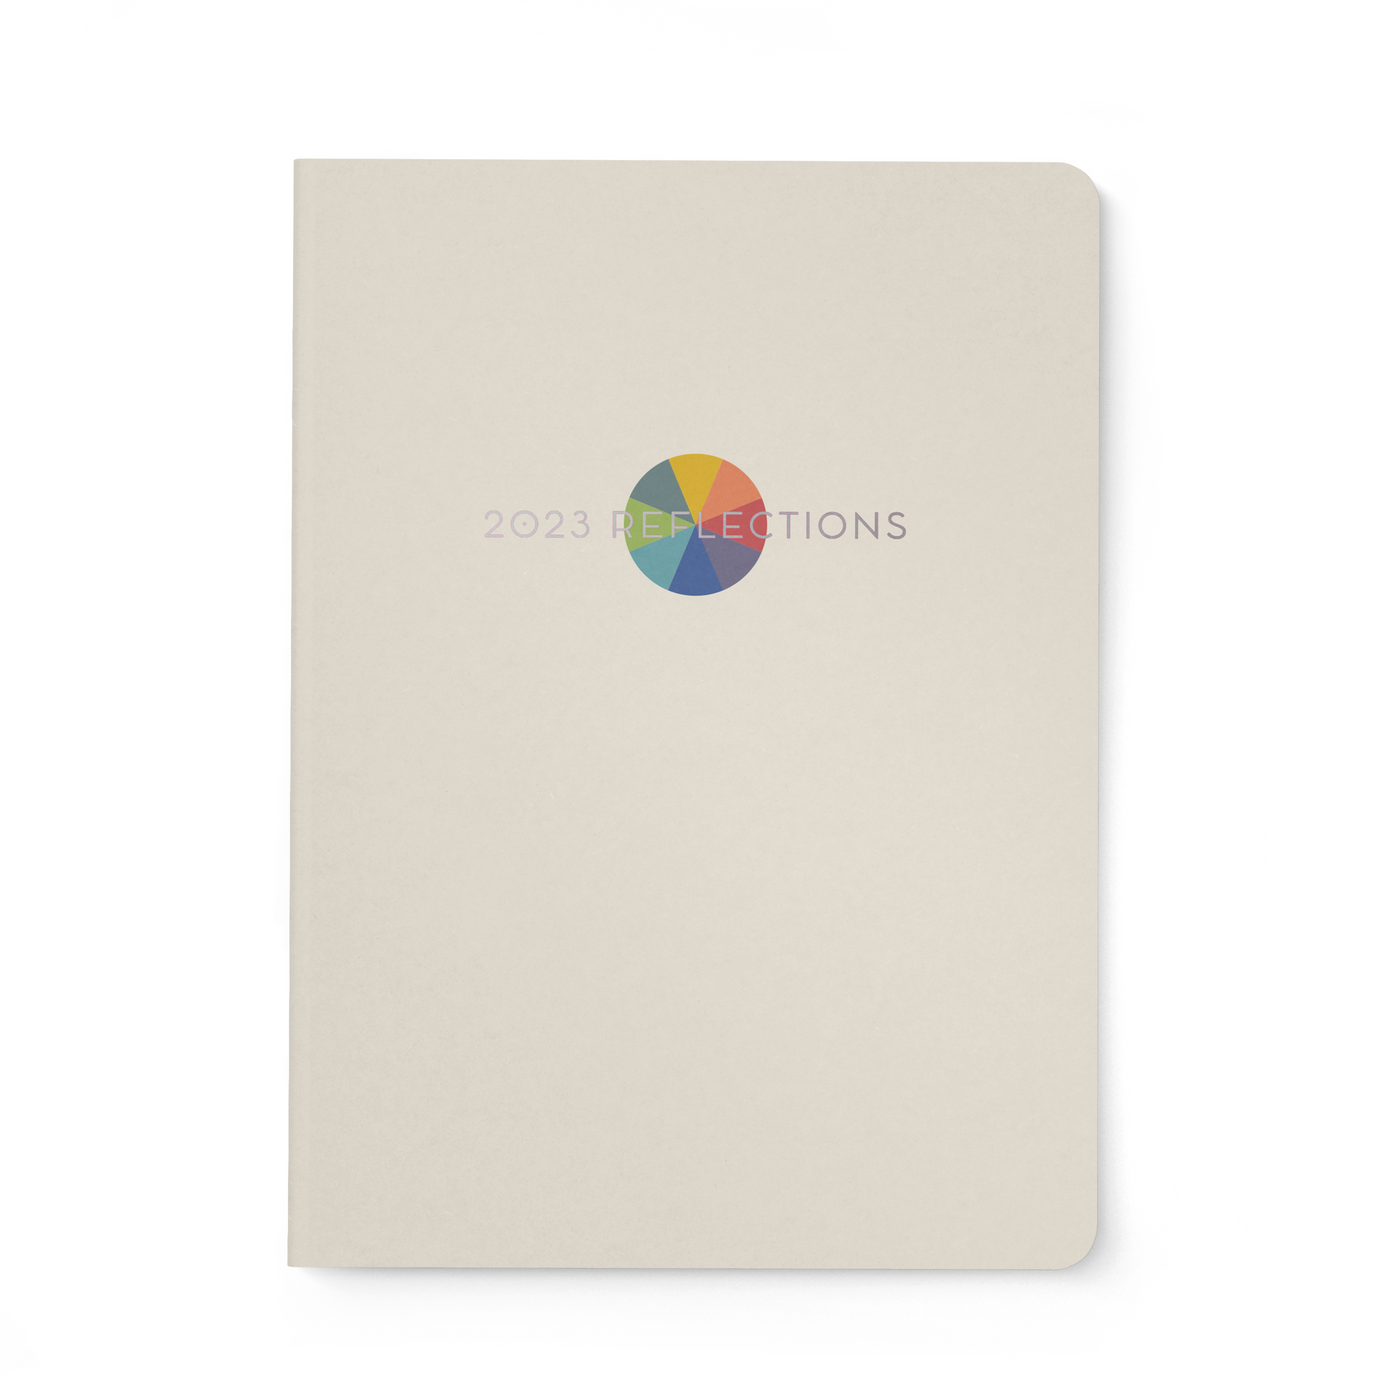 2023 Reflections Notebook